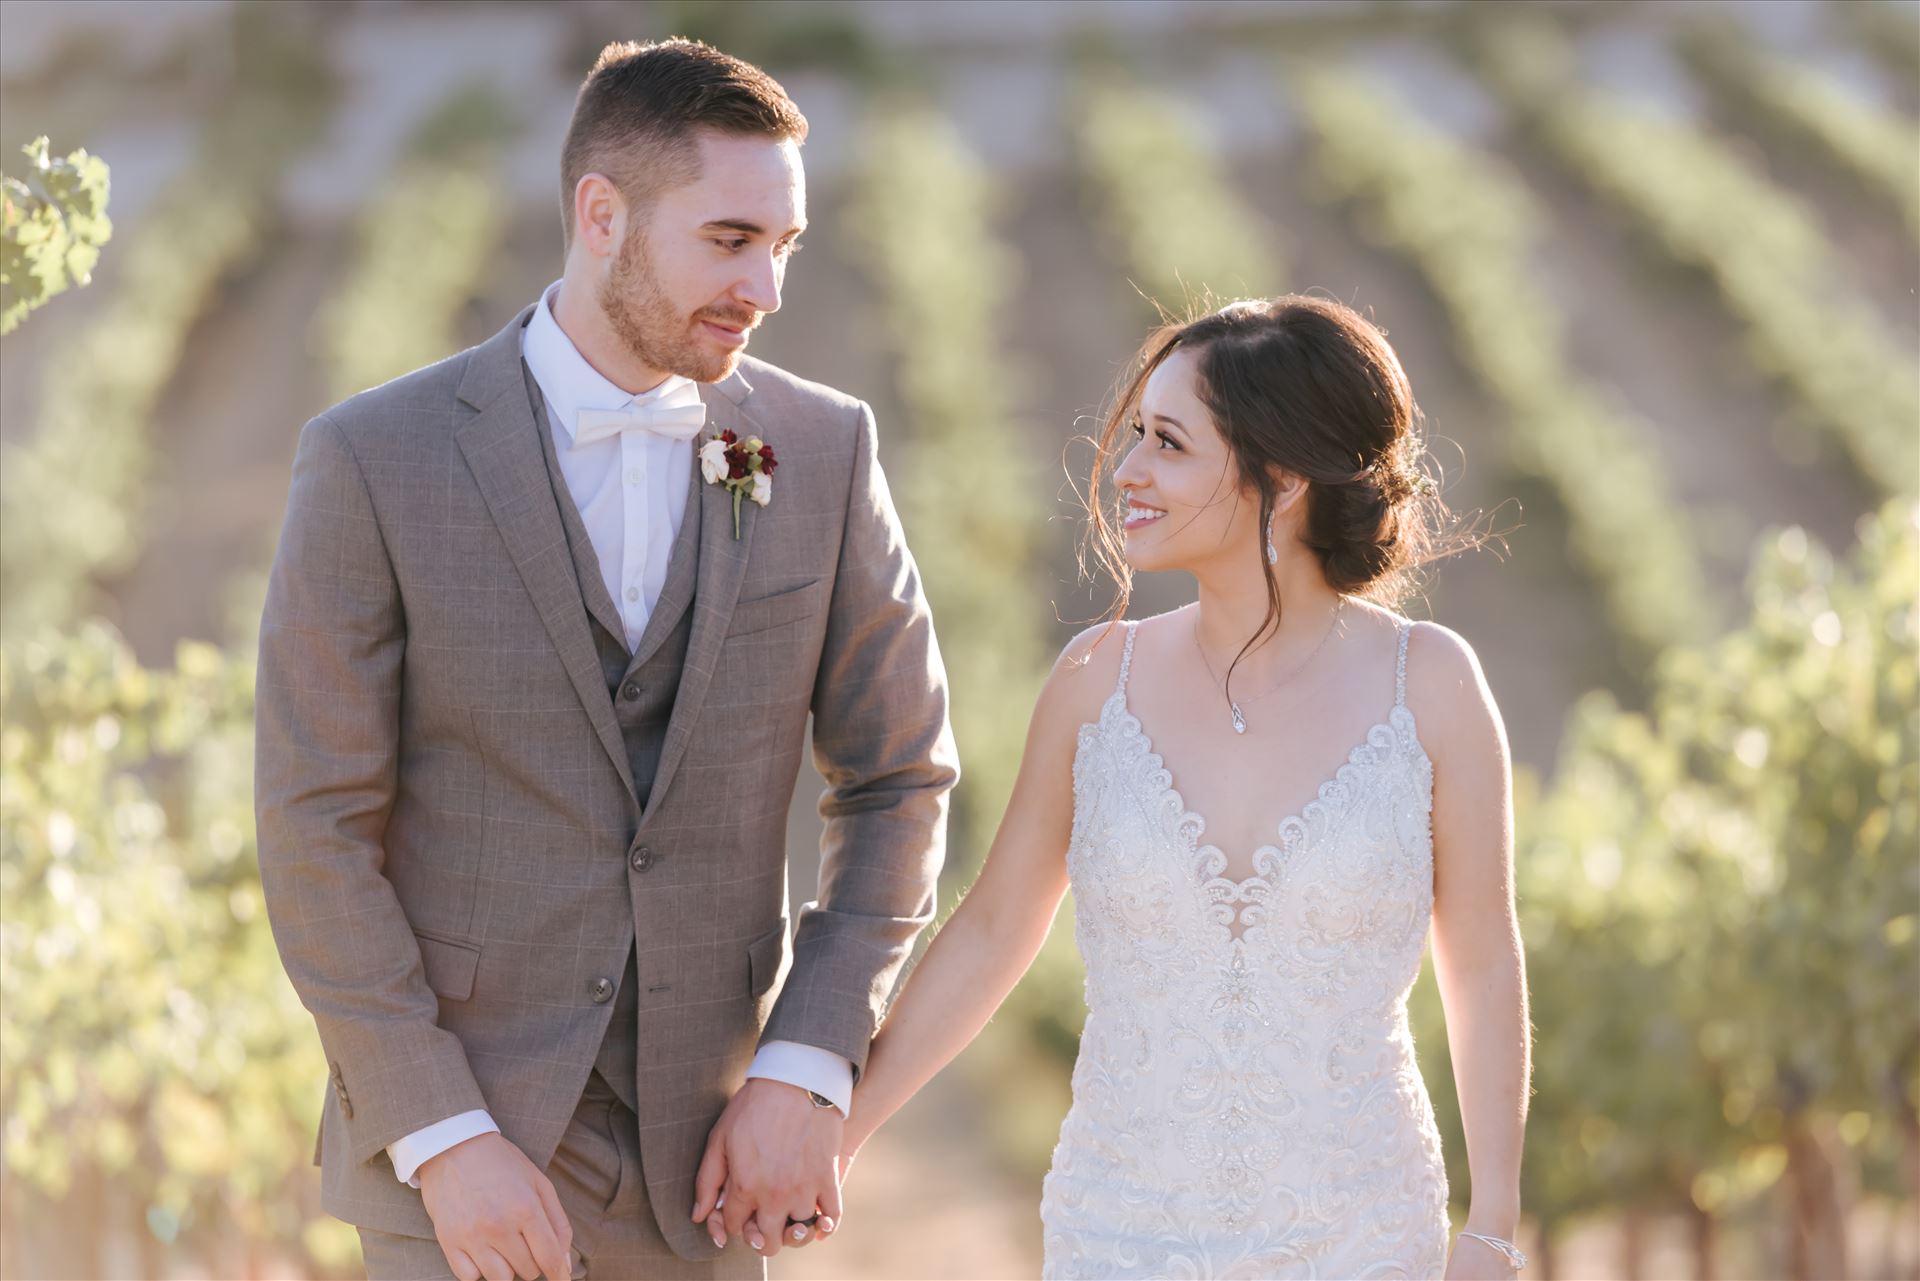 FW-6933.JPGTooth and Nail Winery elegant and formal wedding in Paso Robles California wine country by Mirror's Edge Photography, San Luis Obispo County Wedding Photographer. Bride and Groom walking through the vineyards in Paso Robles California wine country wedding